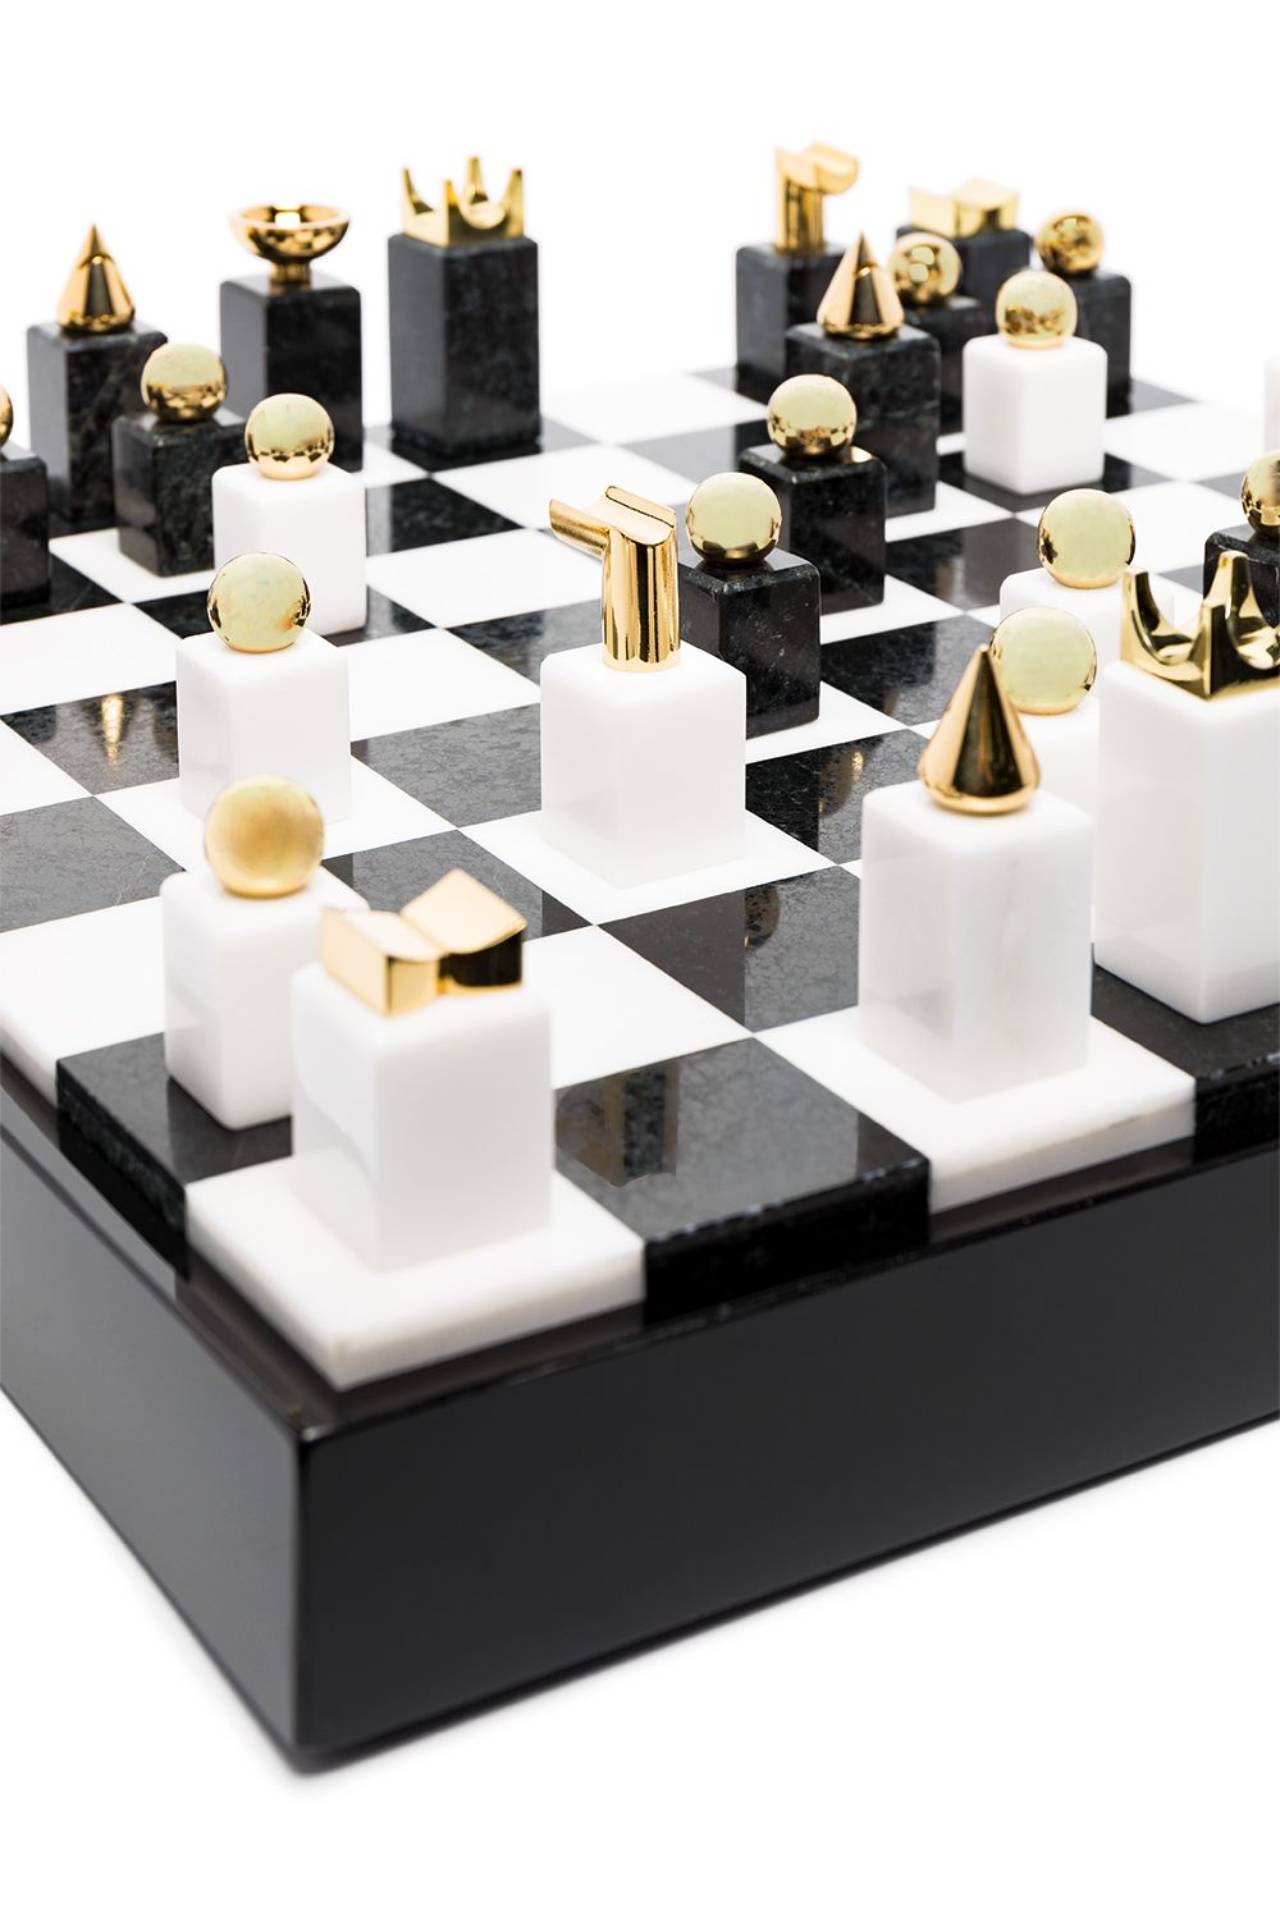 Radicaln Handmade White and Green Onyx Marble Chess Game Marble Black Friday Chess Set Gift for Him